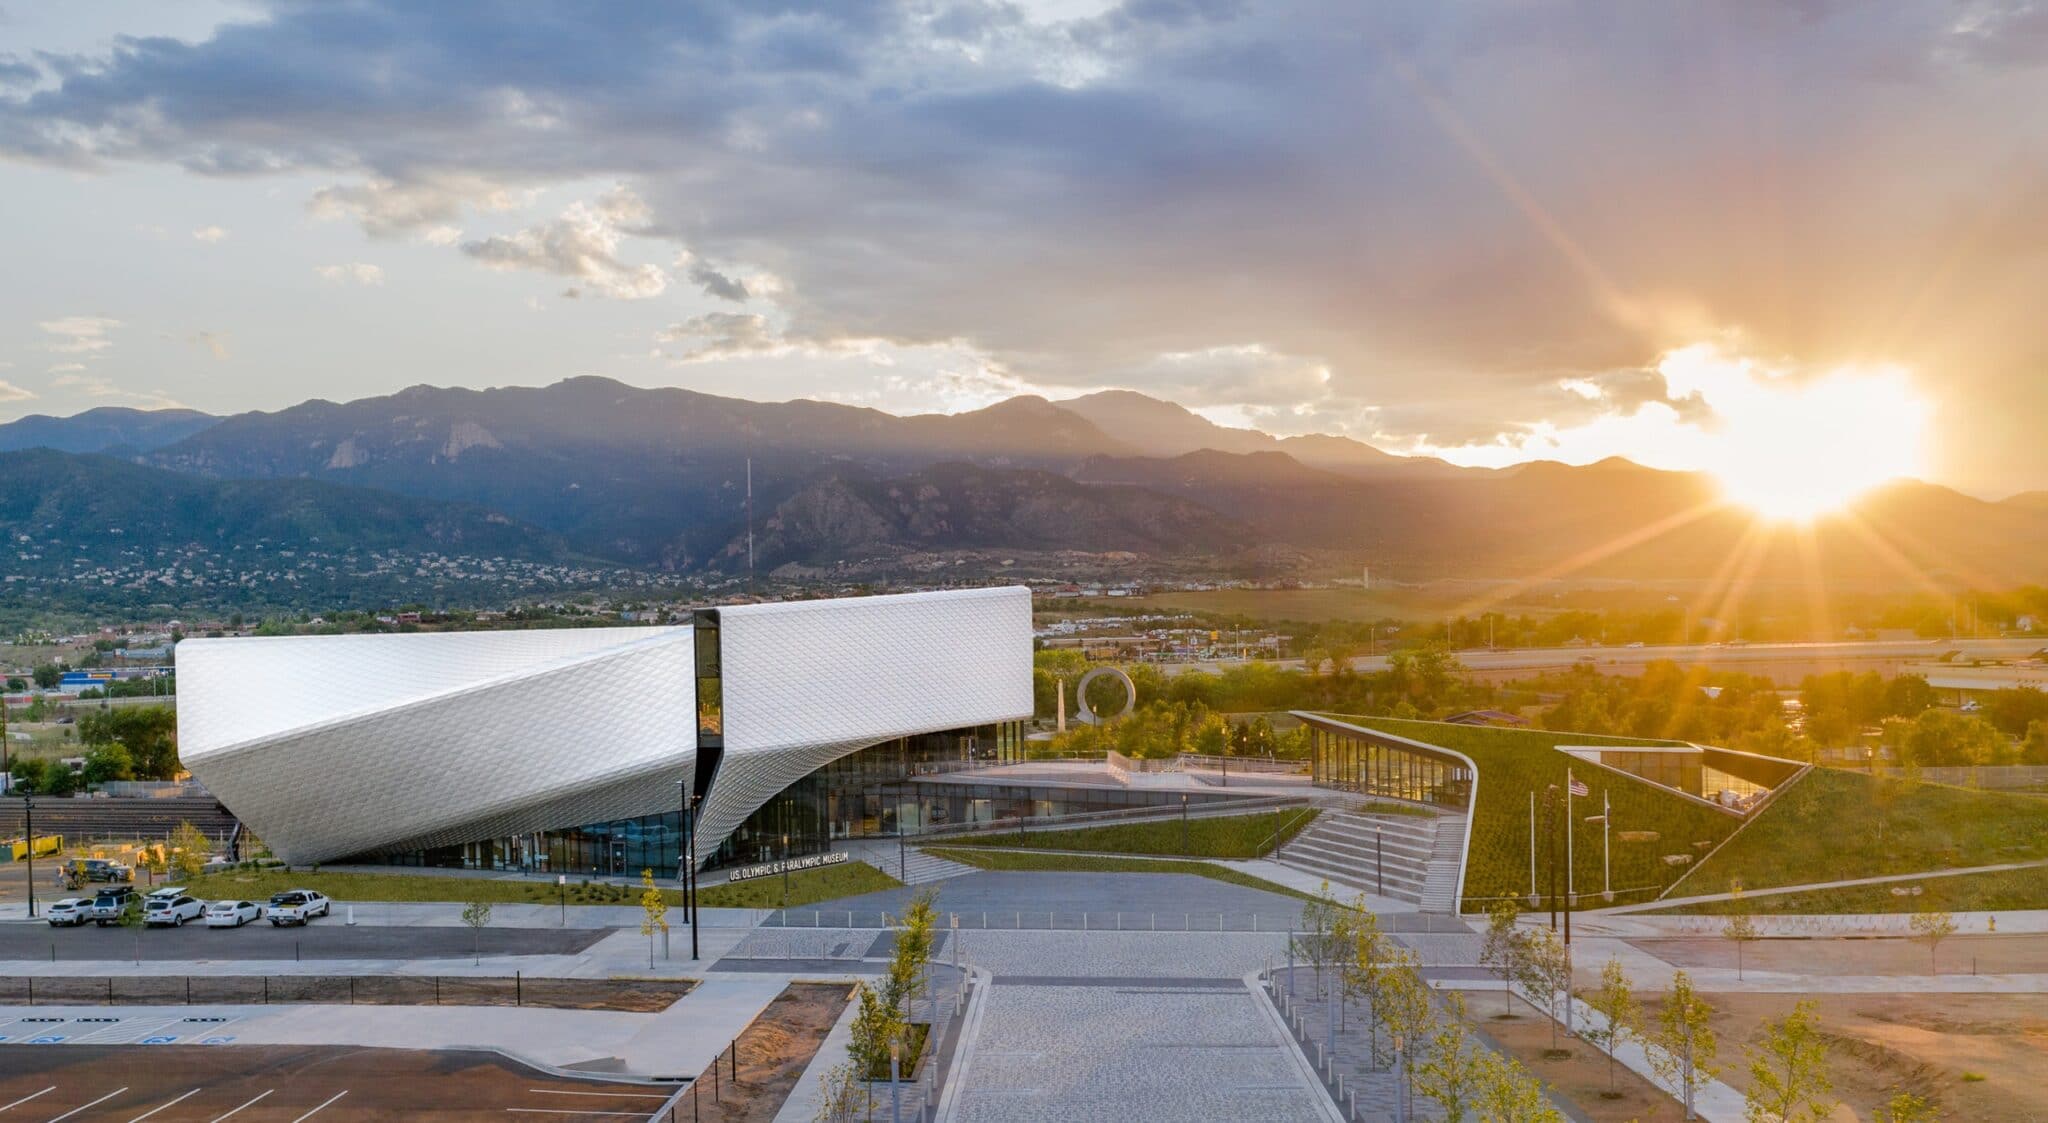 The sun sets over the mountains behind the exterior of the United States Olympic and Paralympic Museum.